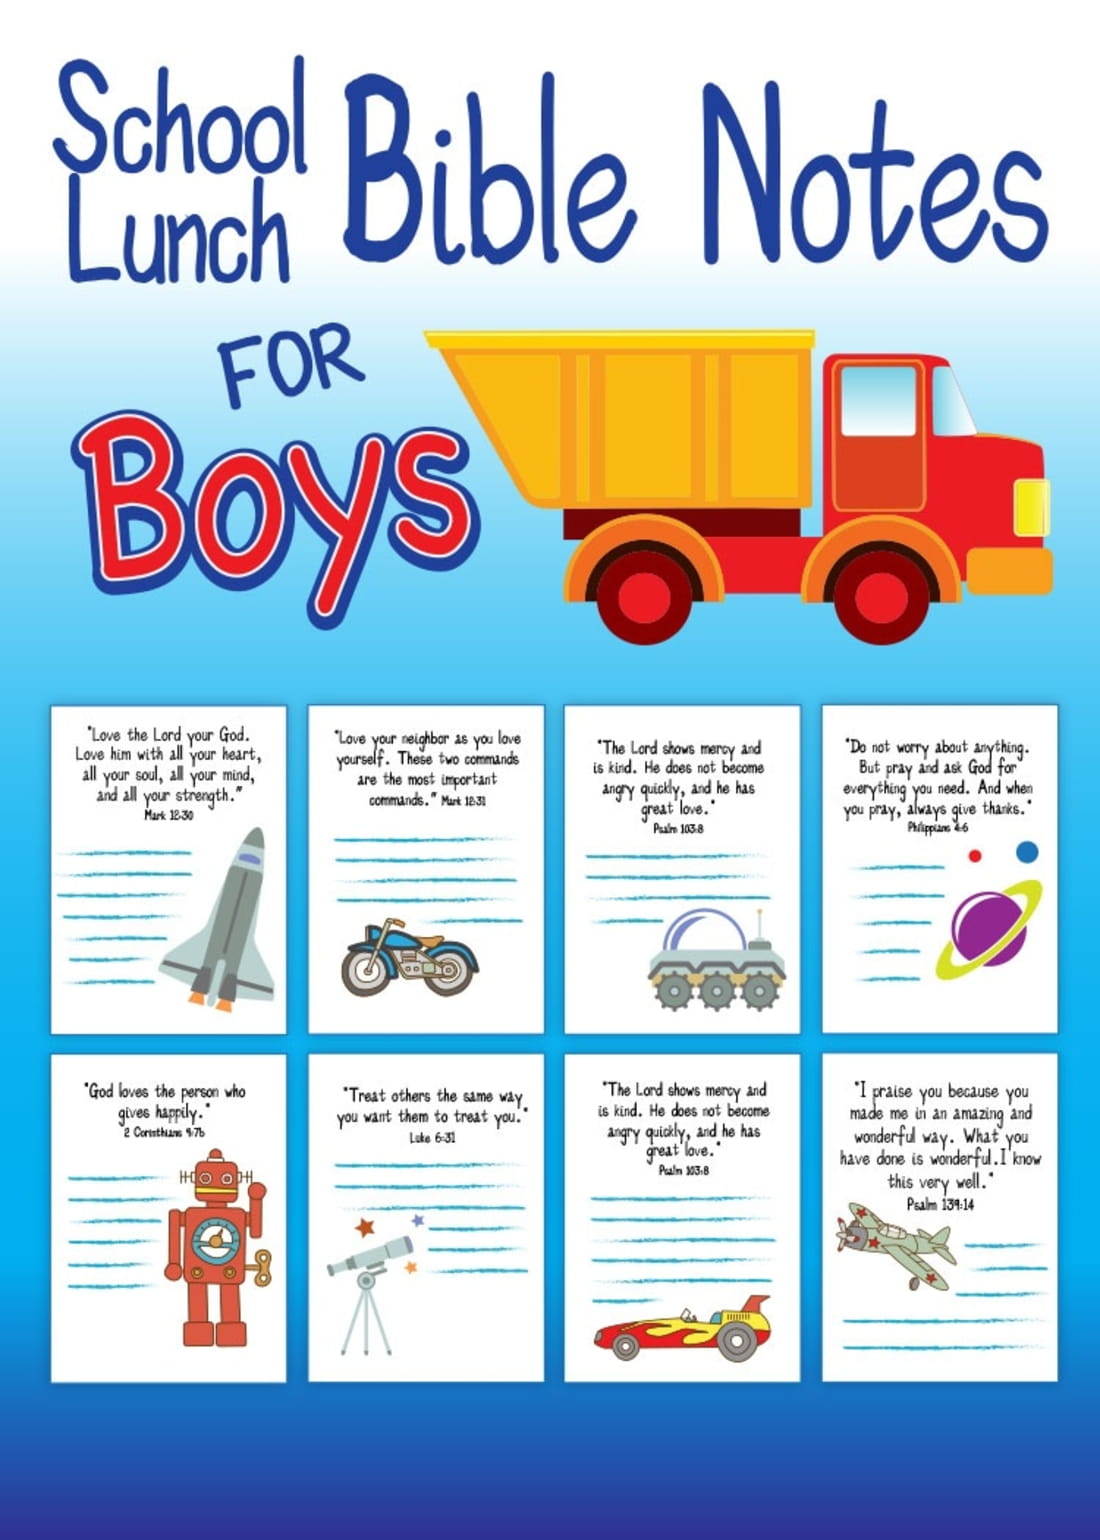 School Lunch Bible Notes for Boys - Free Printable